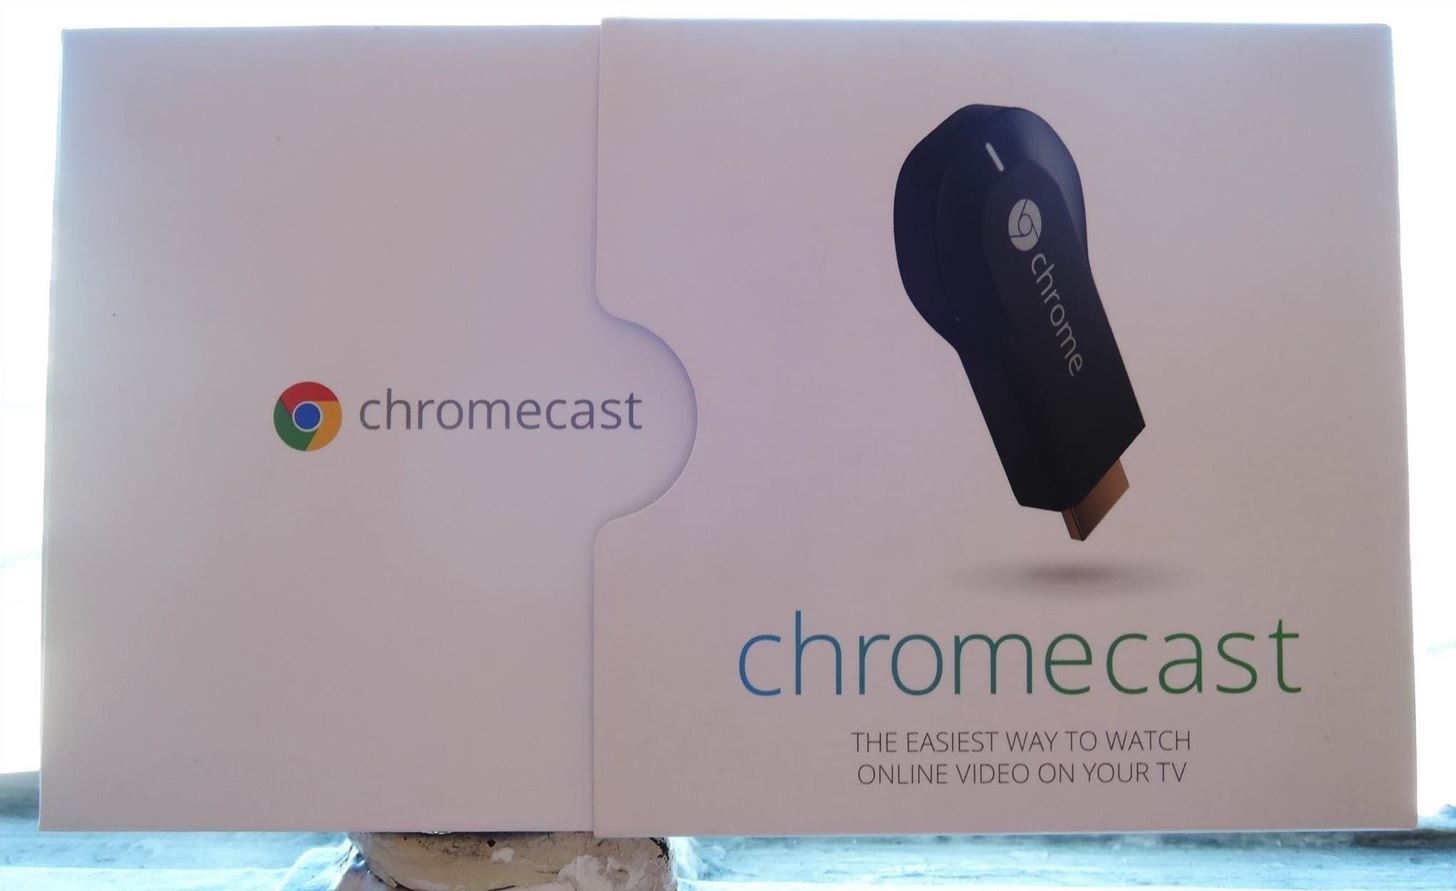 Get a Free $6 Google Play Credit for Every Chromecast You Own